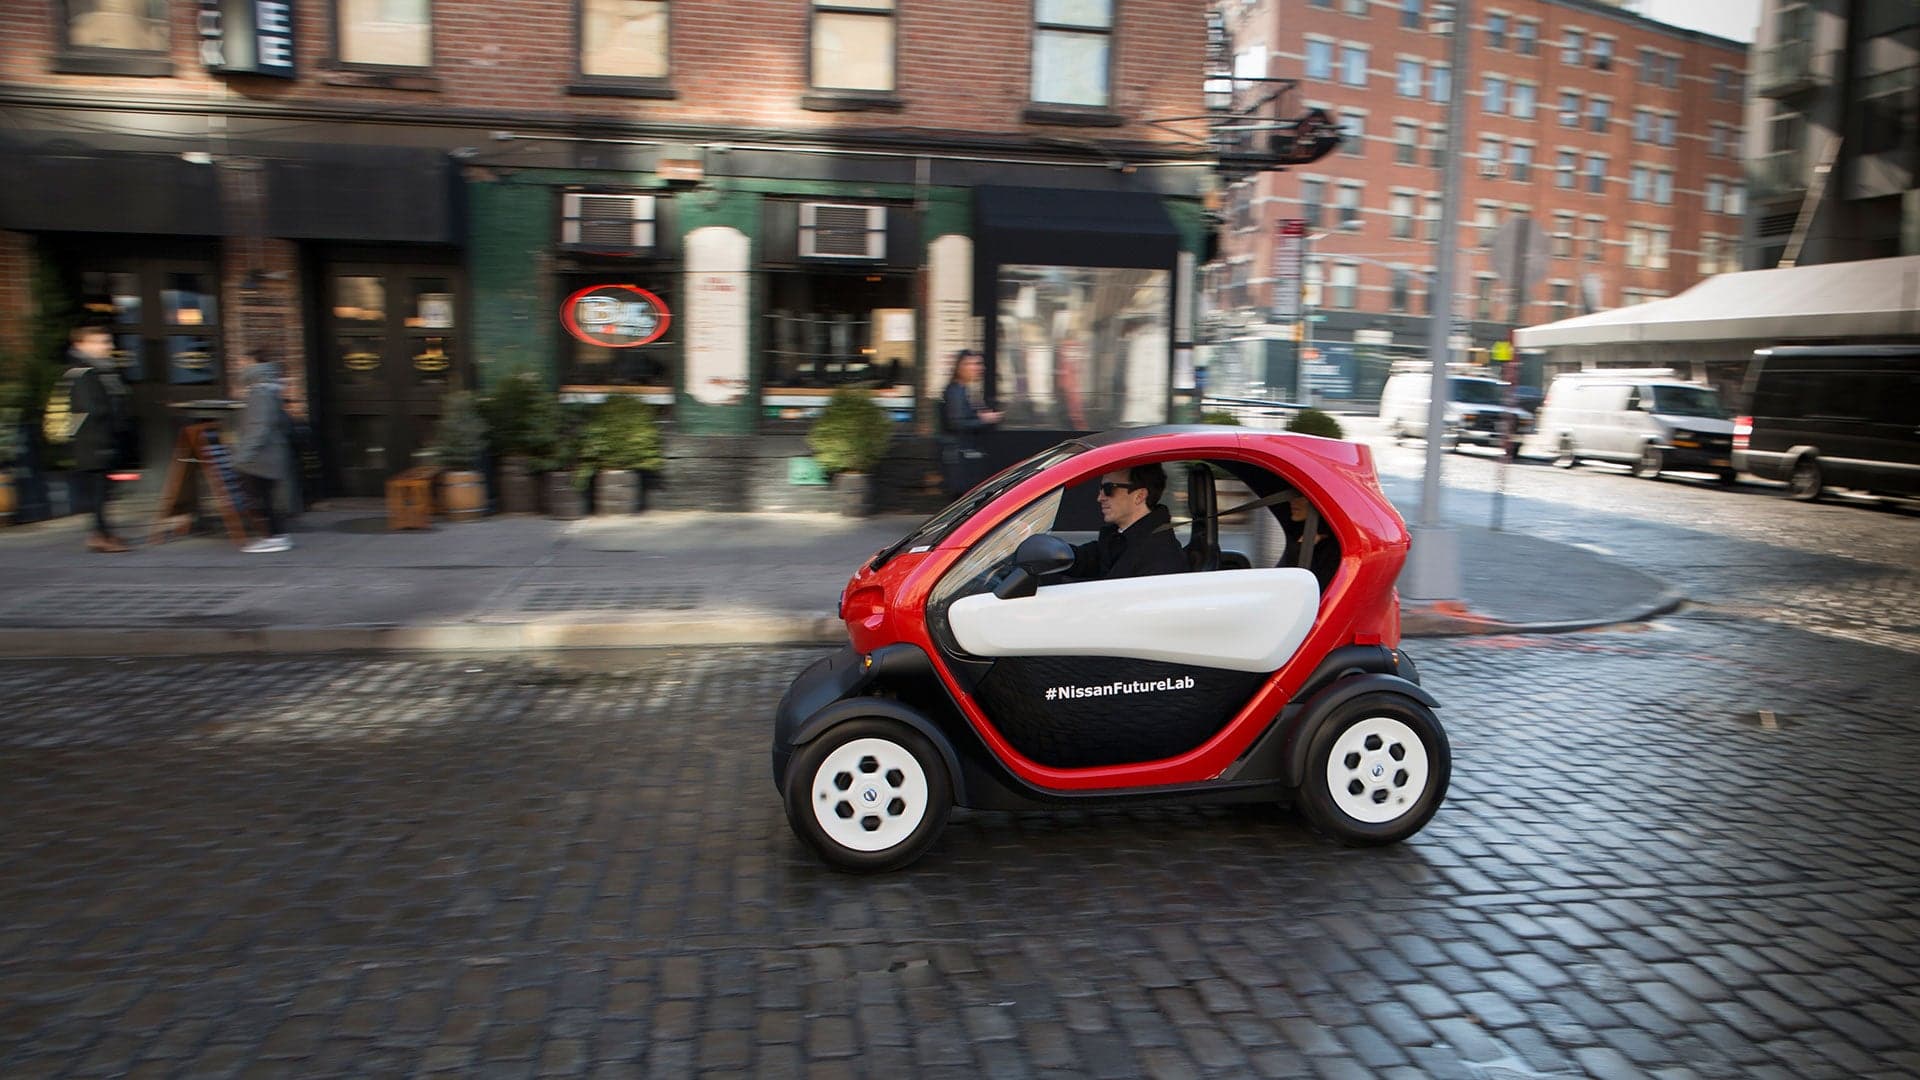 Hitting Manhattan (and Picking Up Chicks) in Nissan’s Mobility Concept